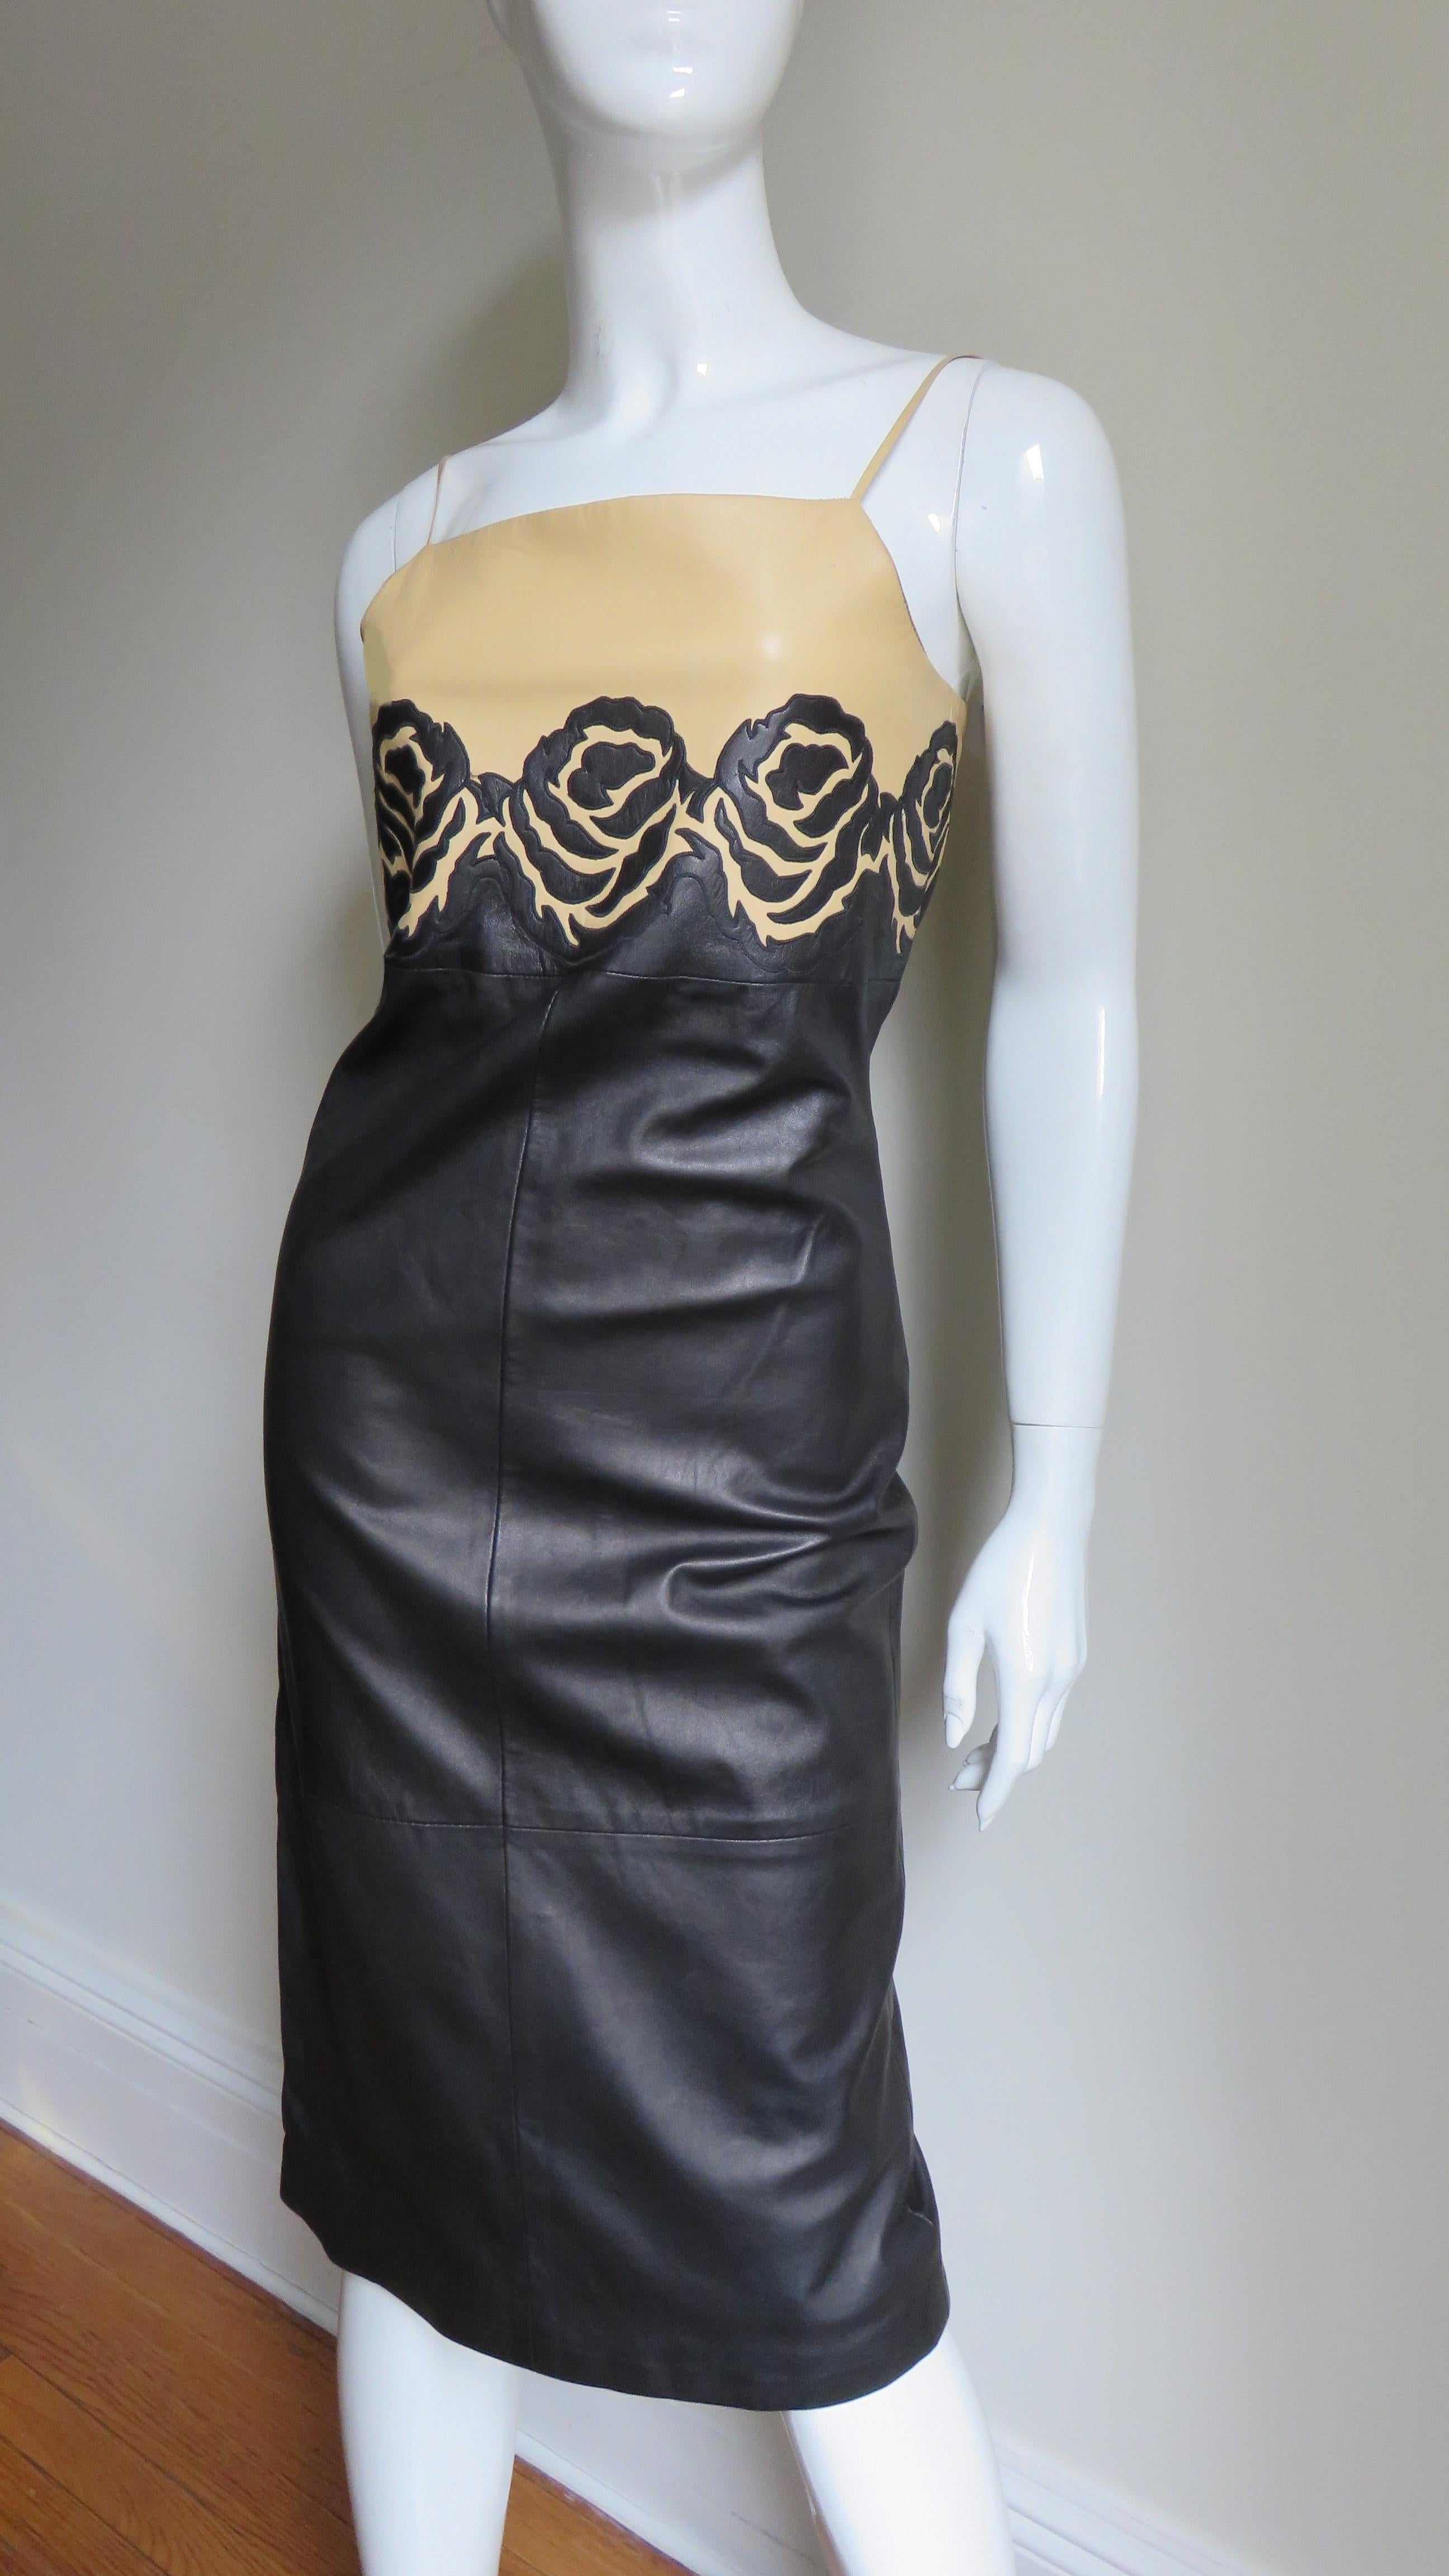  Gianni Versace Leather Color Block Dress with Applique Roses 1990s 2